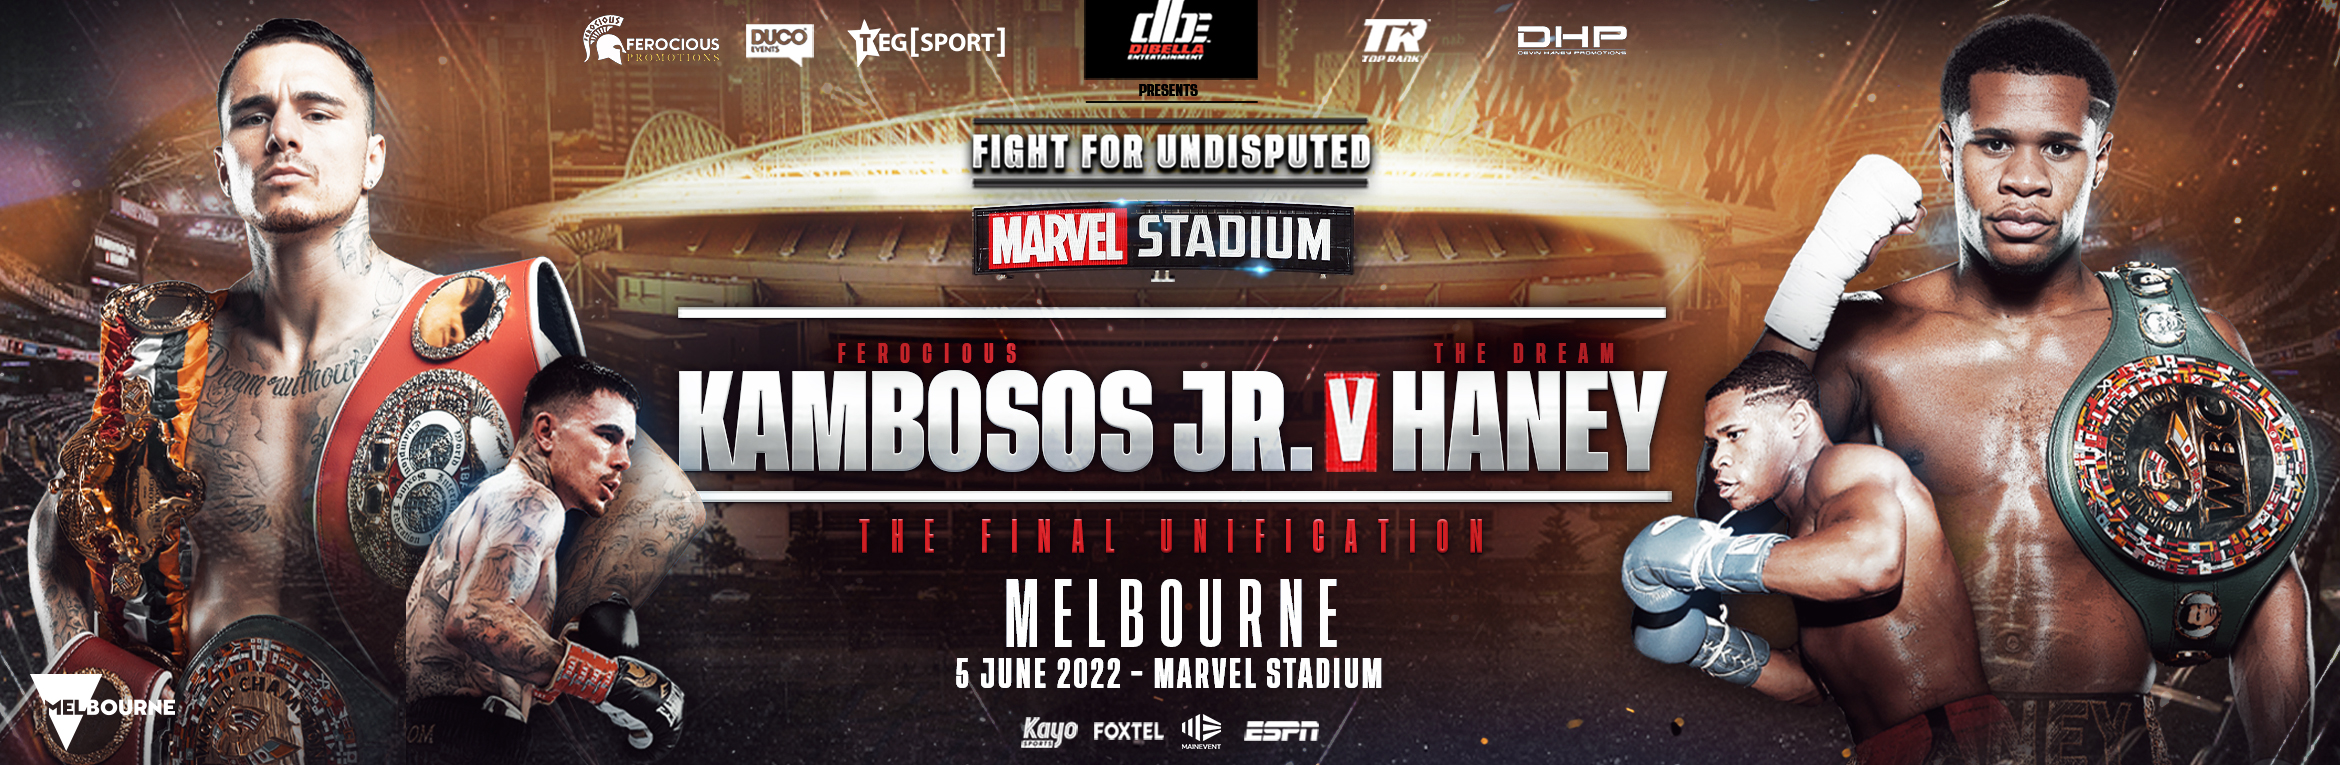 Melbourne set to host historic World Boxing showdown between undisputed Australian Champion George Kambosos Jr and American Superstar Devin Haney